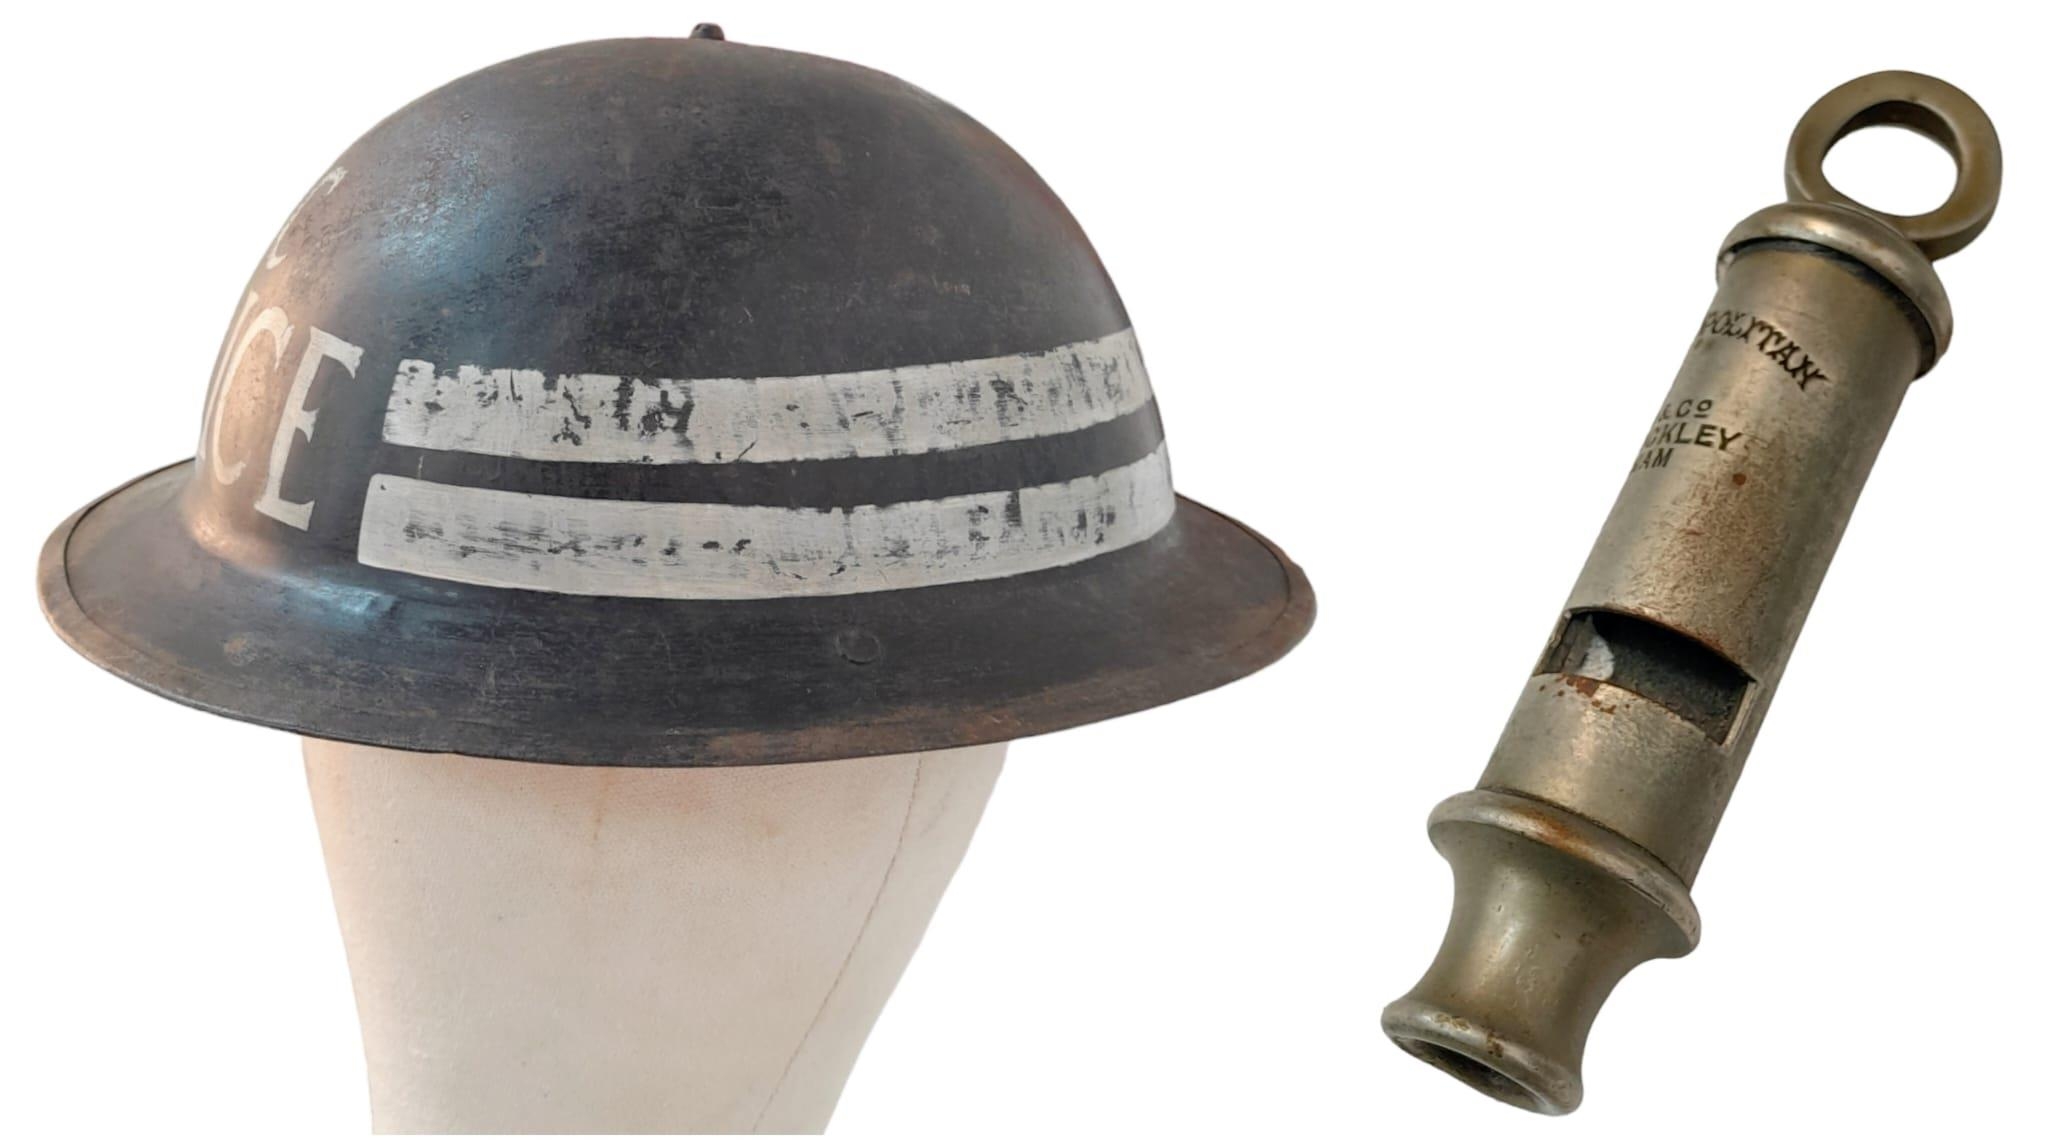 WW2 British Home Front Special Constable’s Helmet, Truncheon and Whistle. An attic find during a - Image 3 of 4